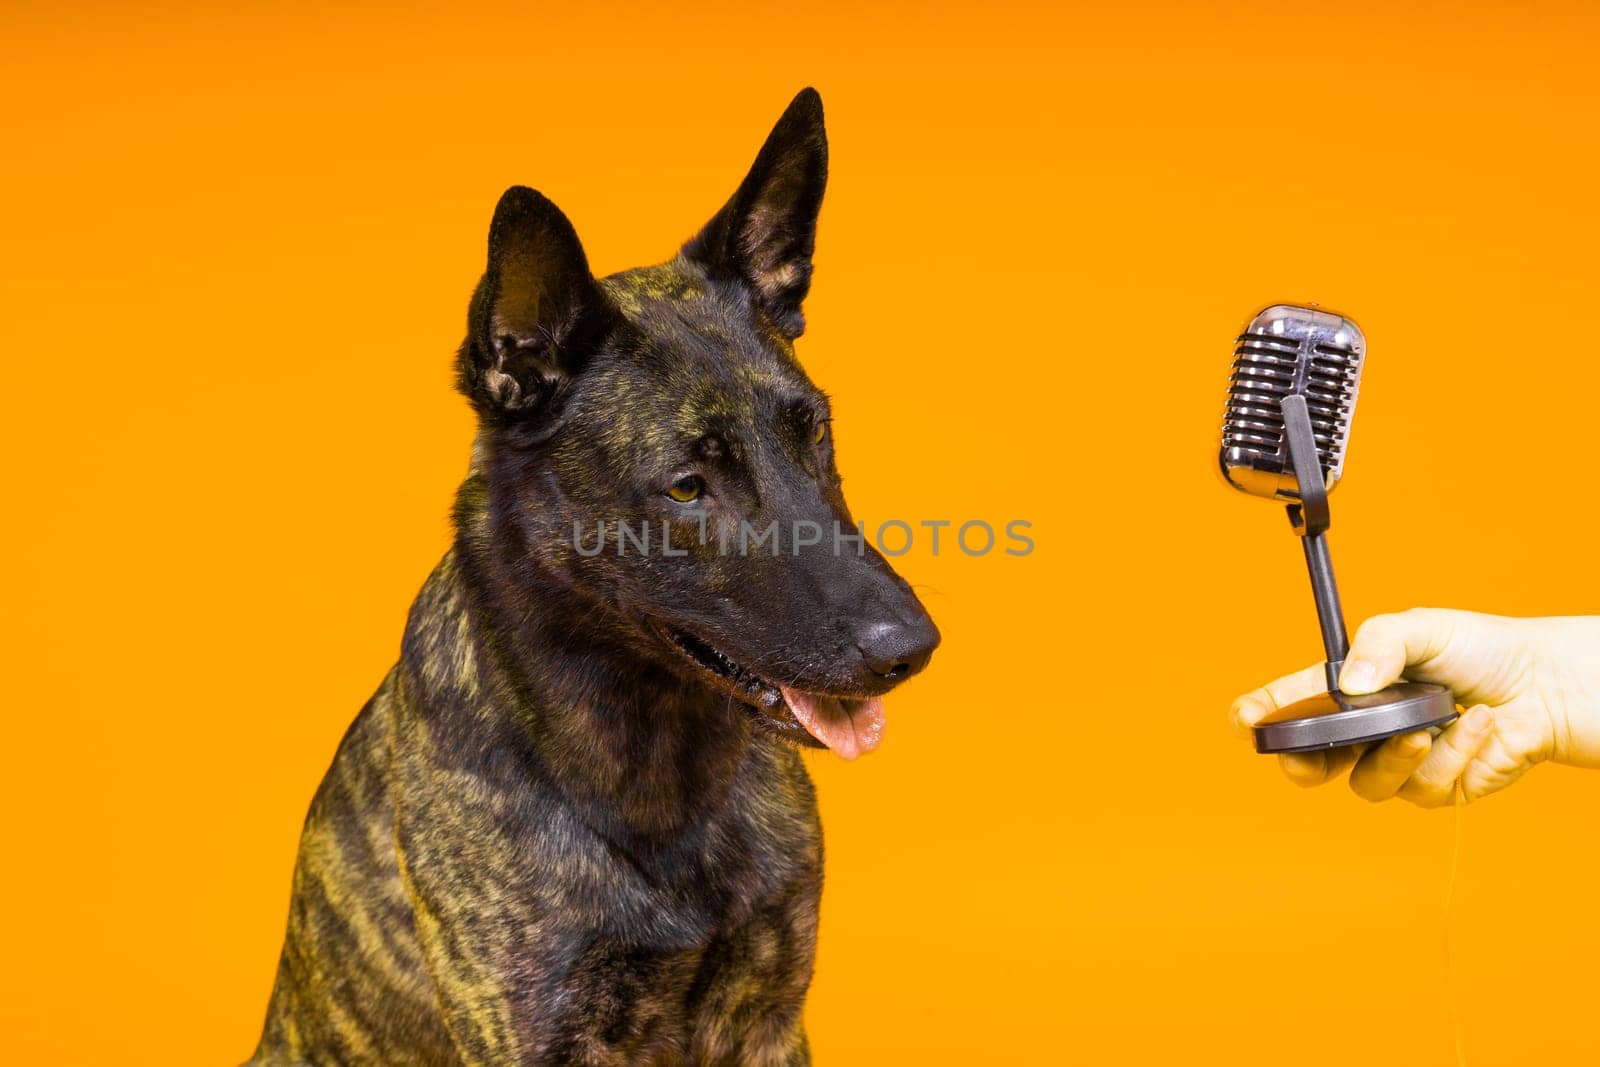 Dutch shepherd dog with microphone on red and yellow background by Zelenin